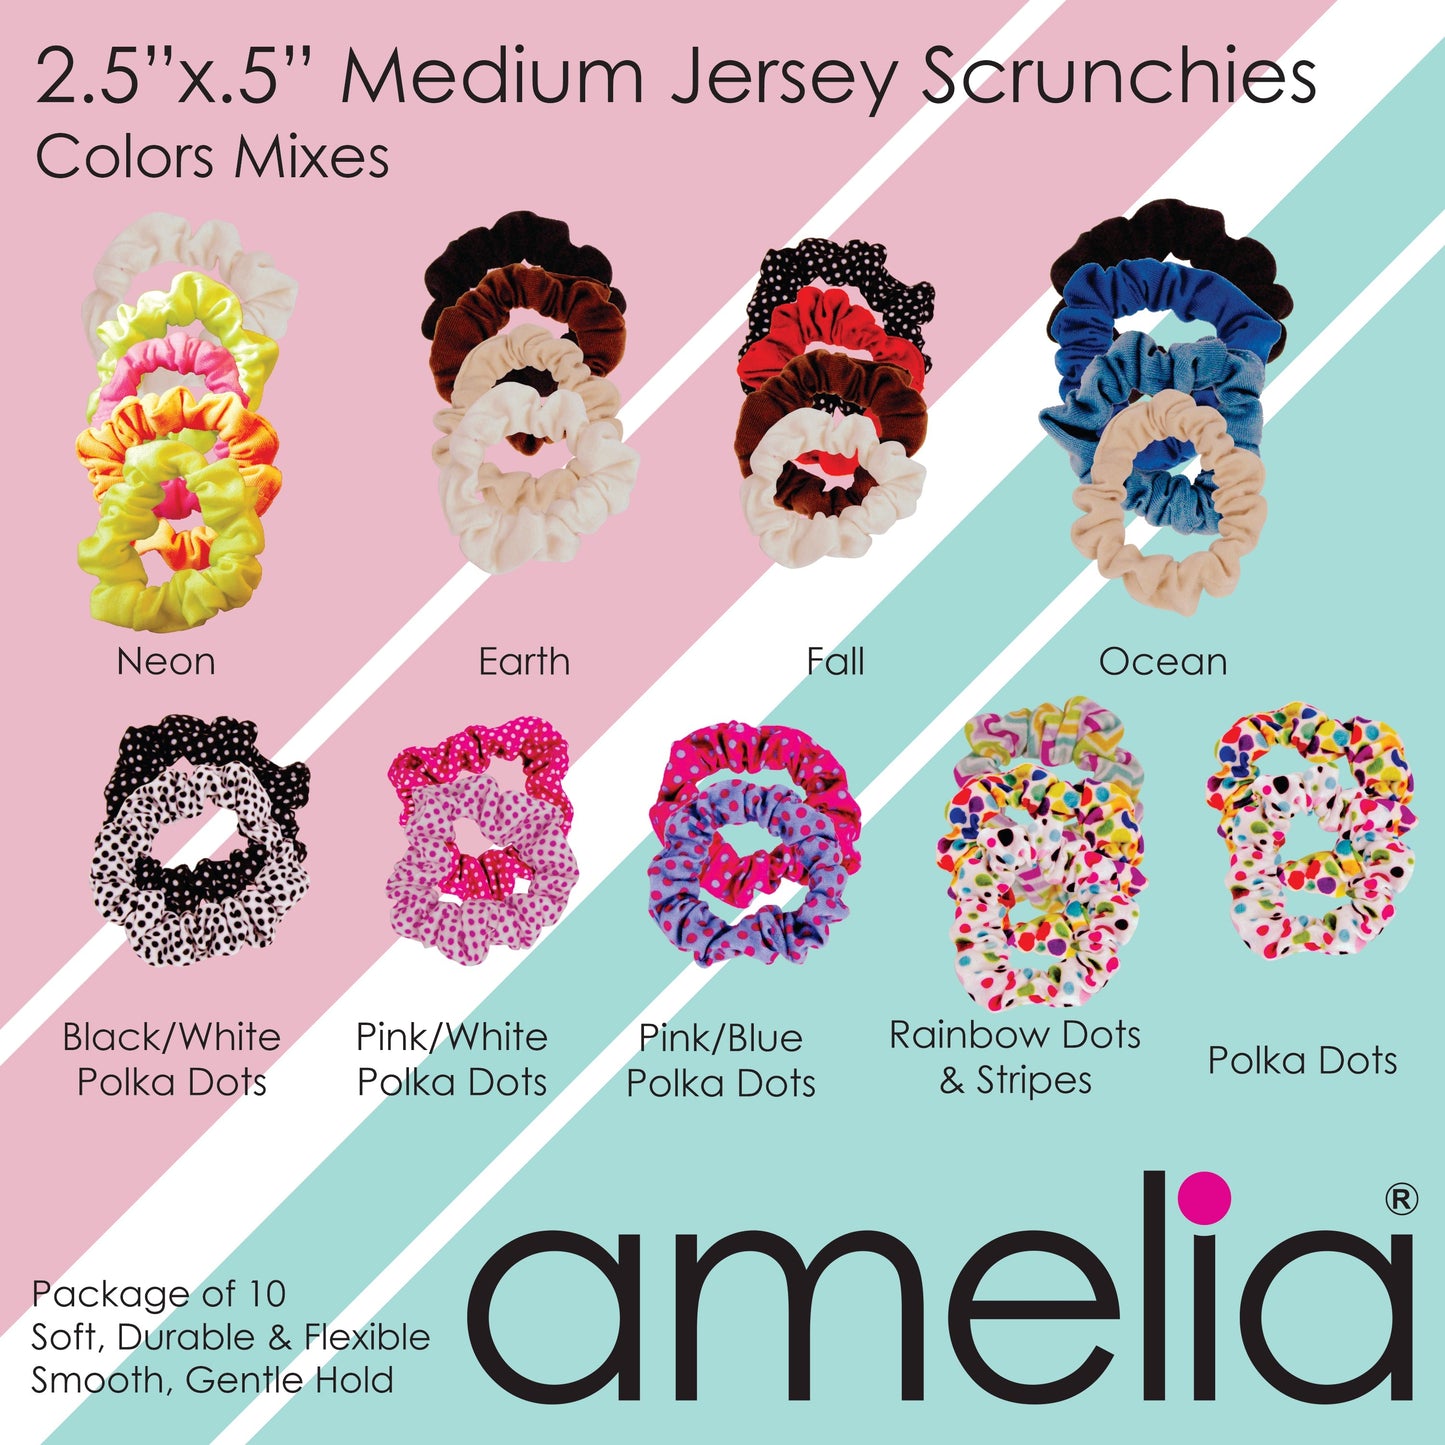 Amelia Beauty, Medium White with Pink Polka Dot Jersey Scrunchies, 2.5in Diameter, Gentle on Hair, Strong Hold, No Snag, No Dents or Creases. 10 Pack - 12 Retail Packs